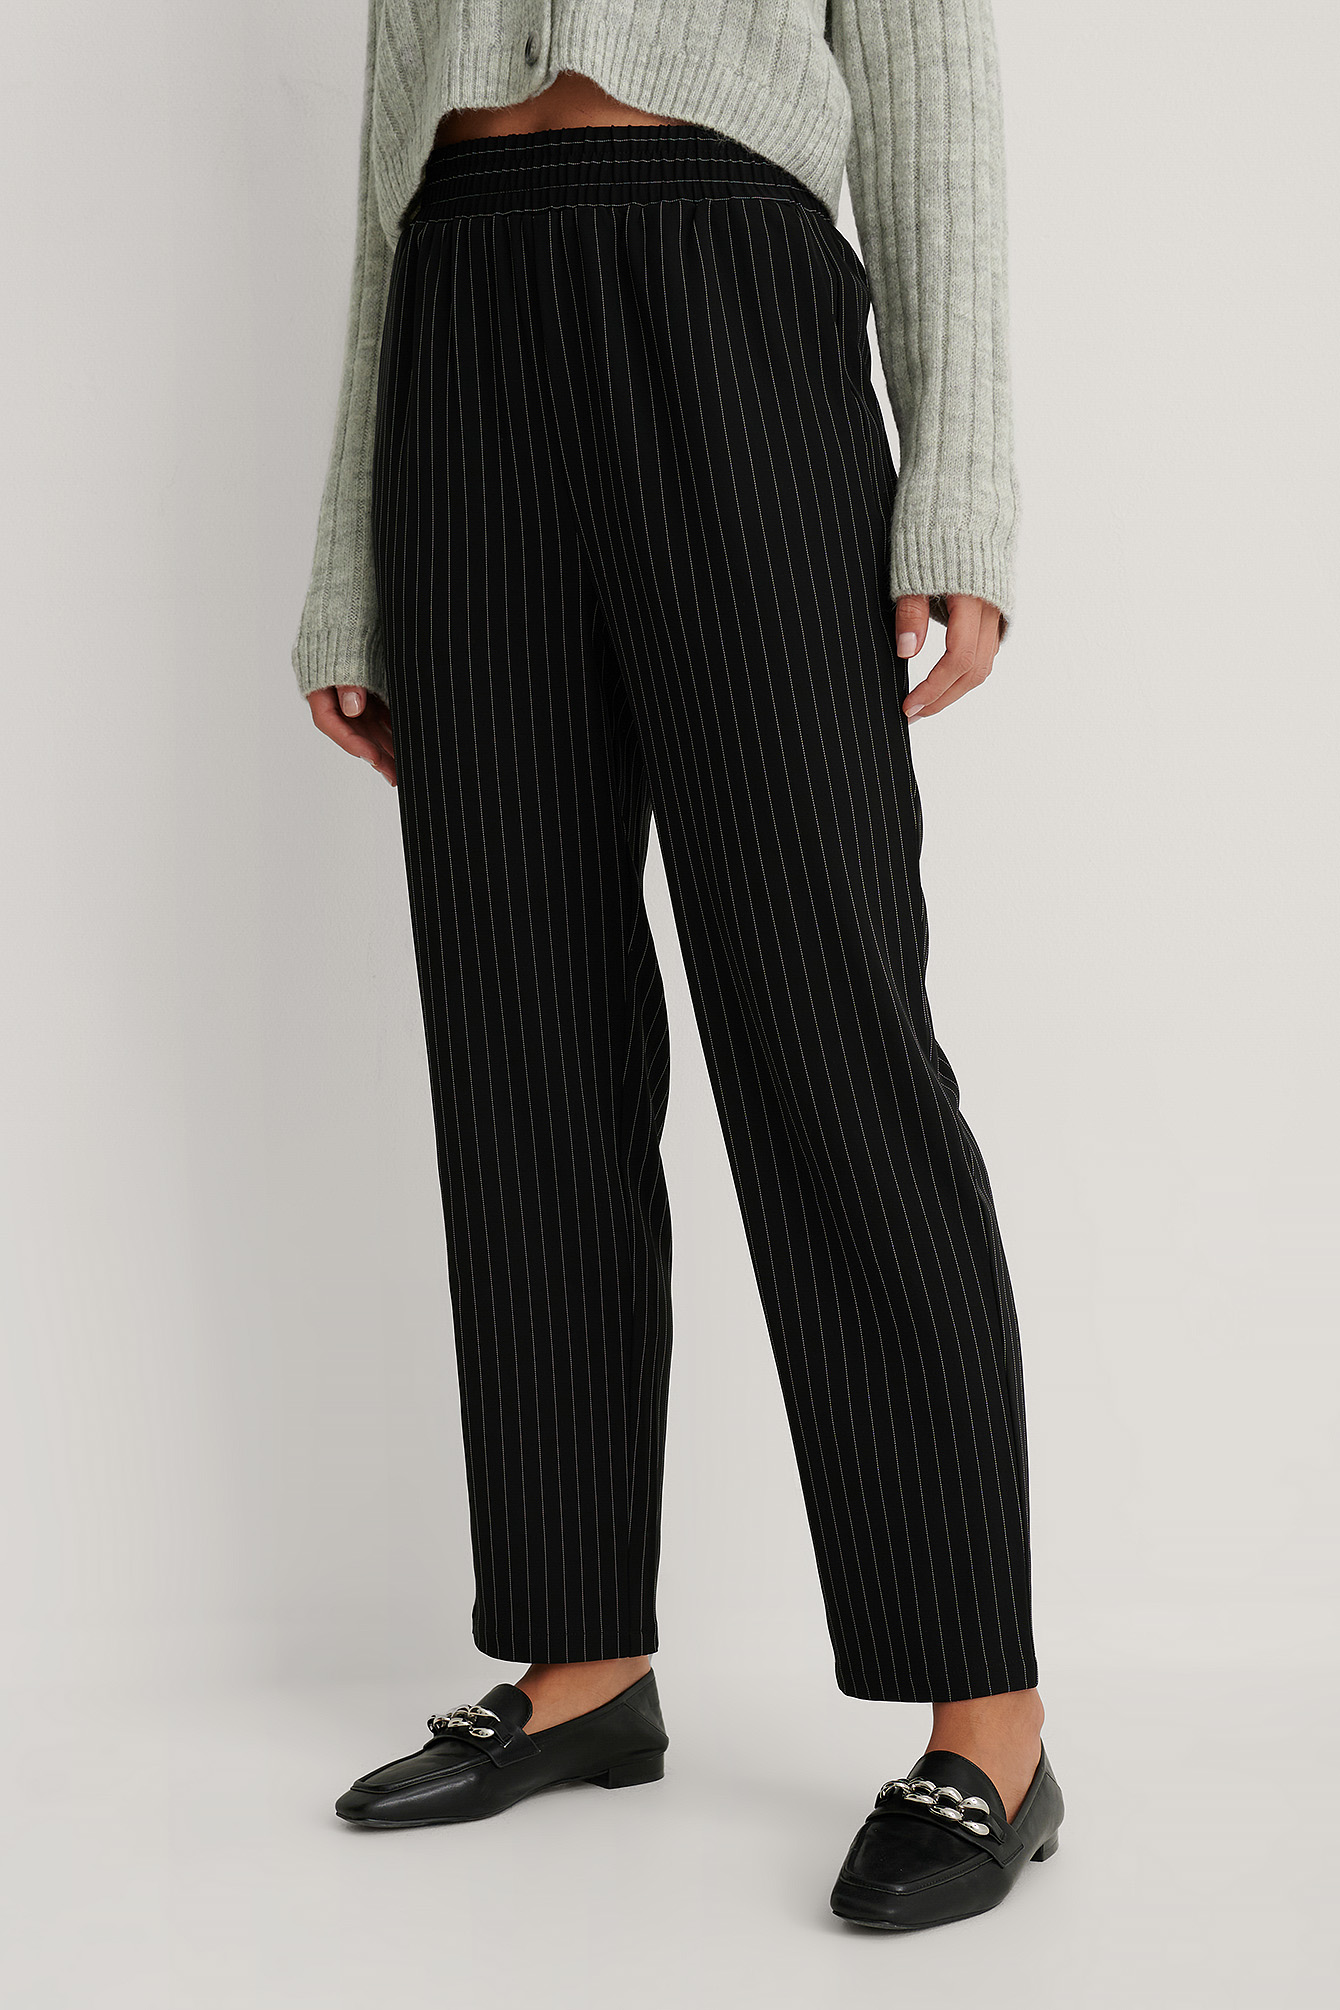 Trousers for women Murphy & nye trousers Spiki Pinstripe Pants Trousers Size 31 